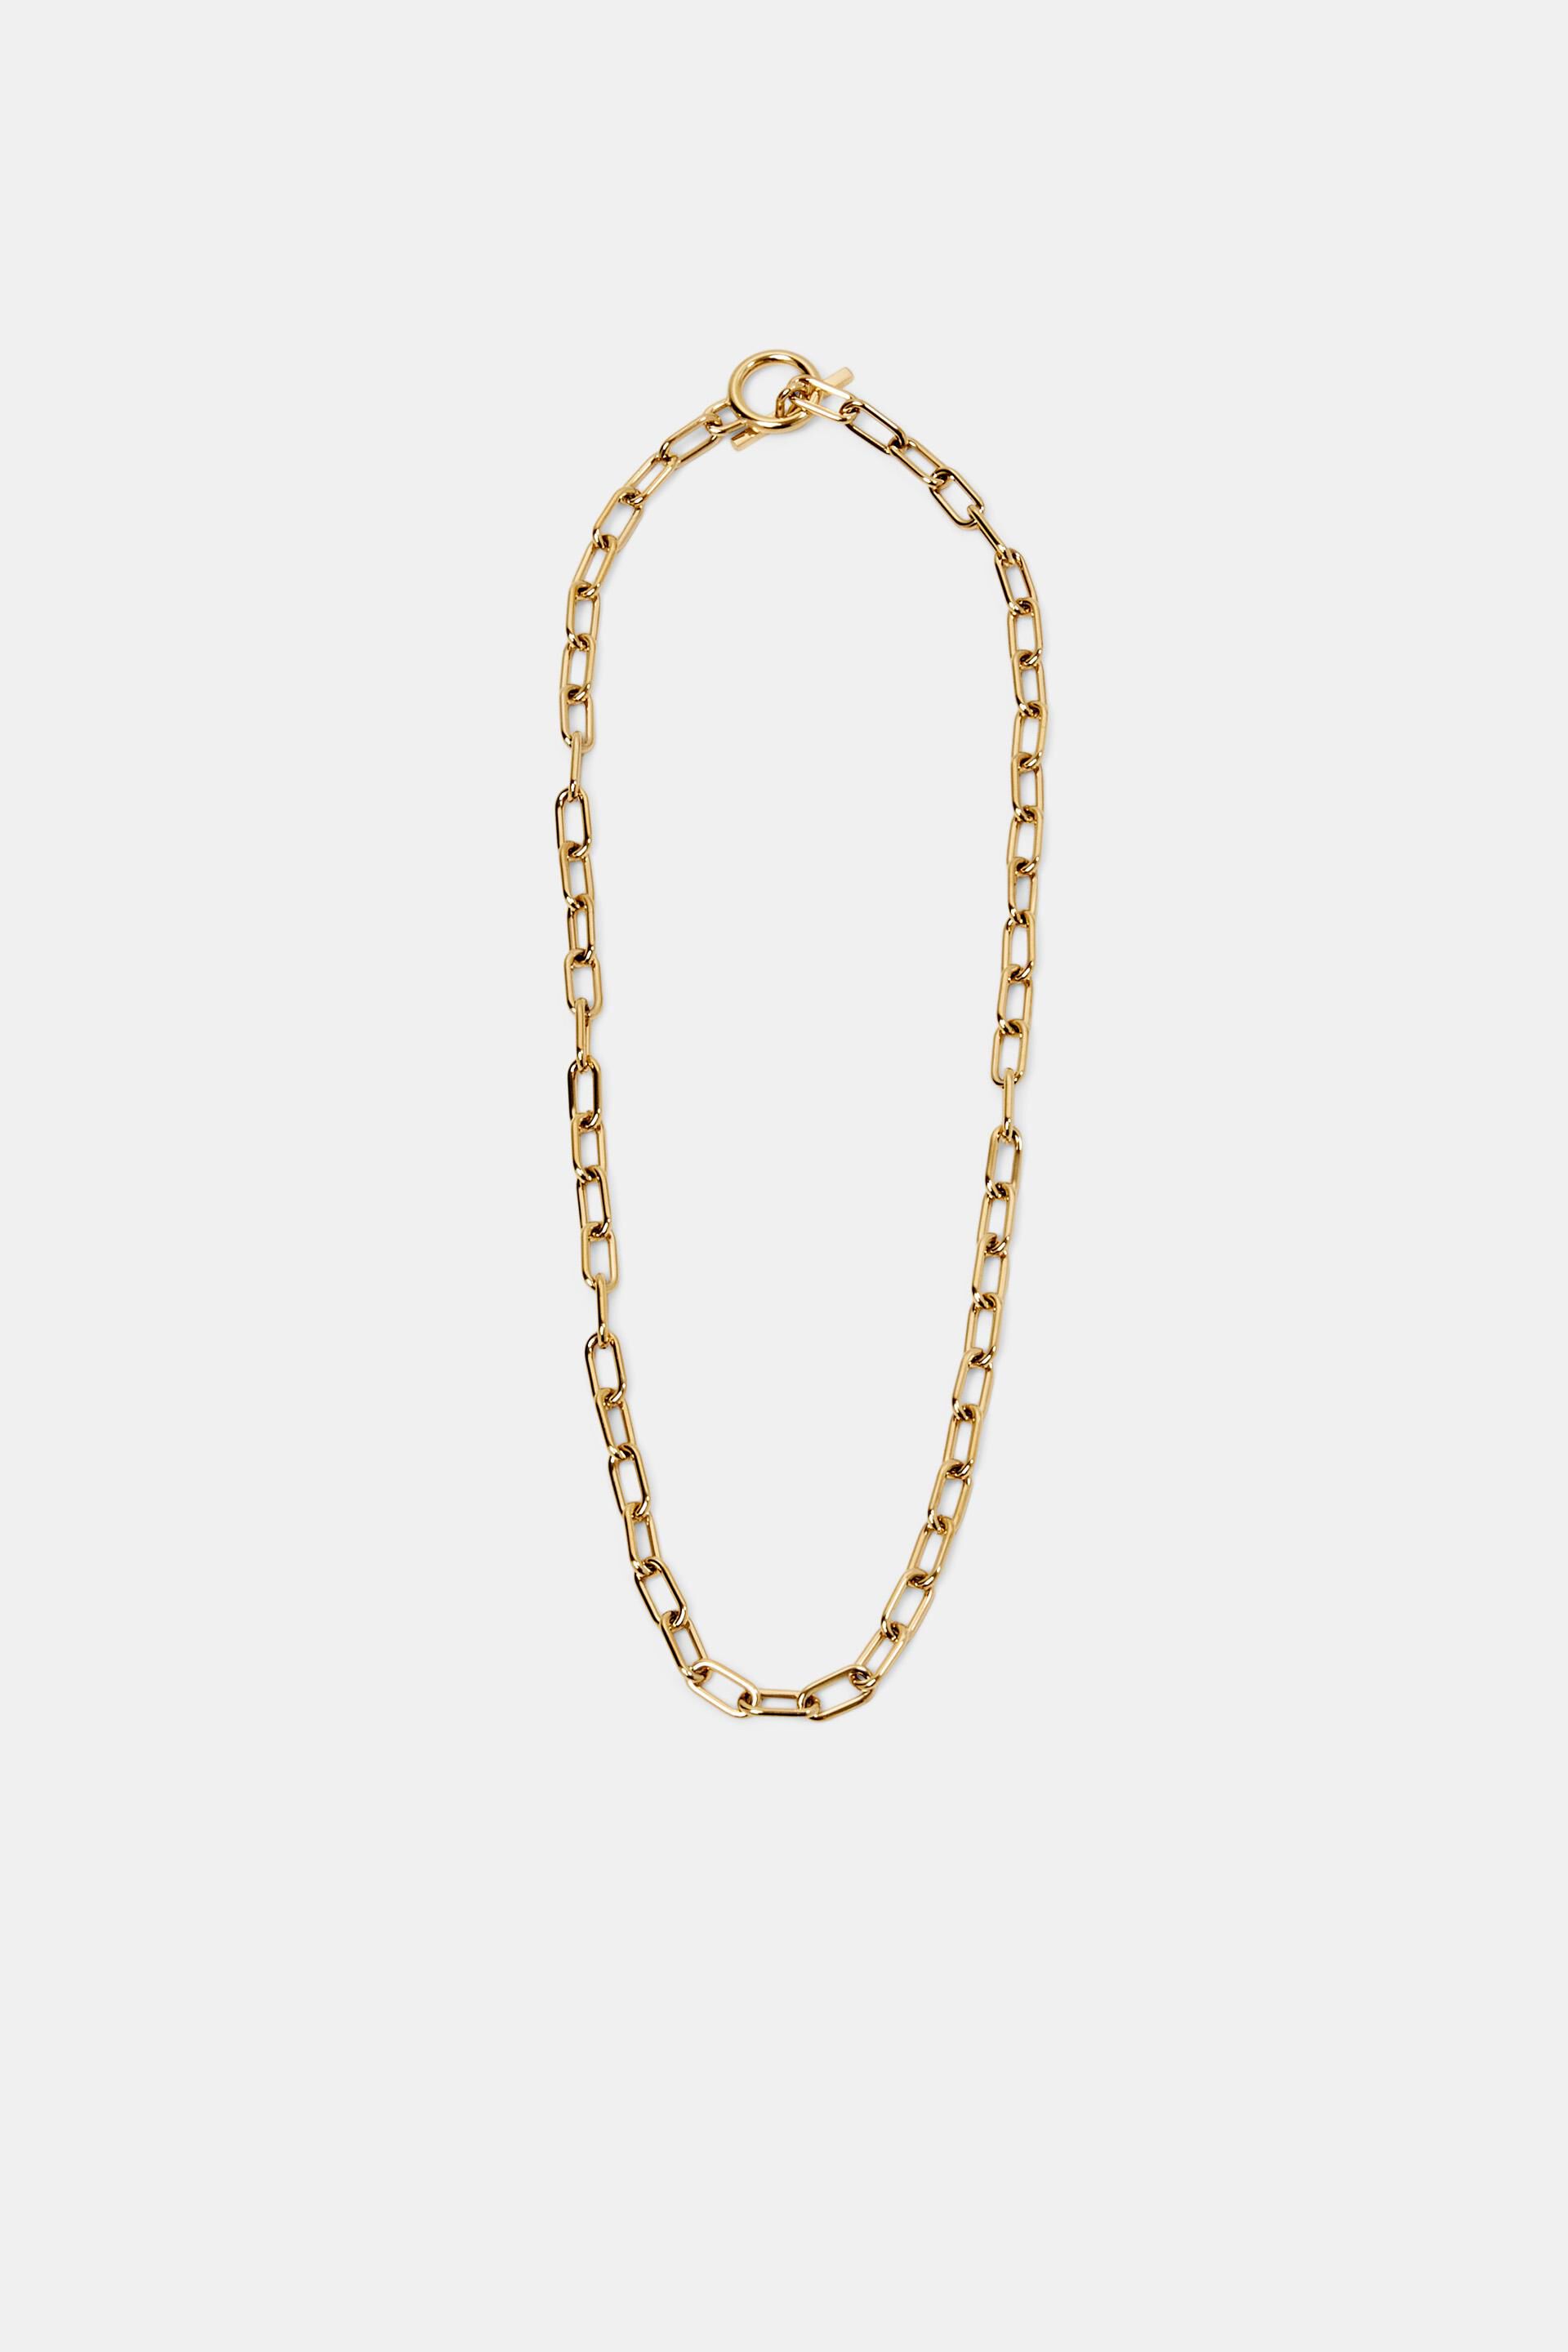 Esprit stainless steel necklace, Chain